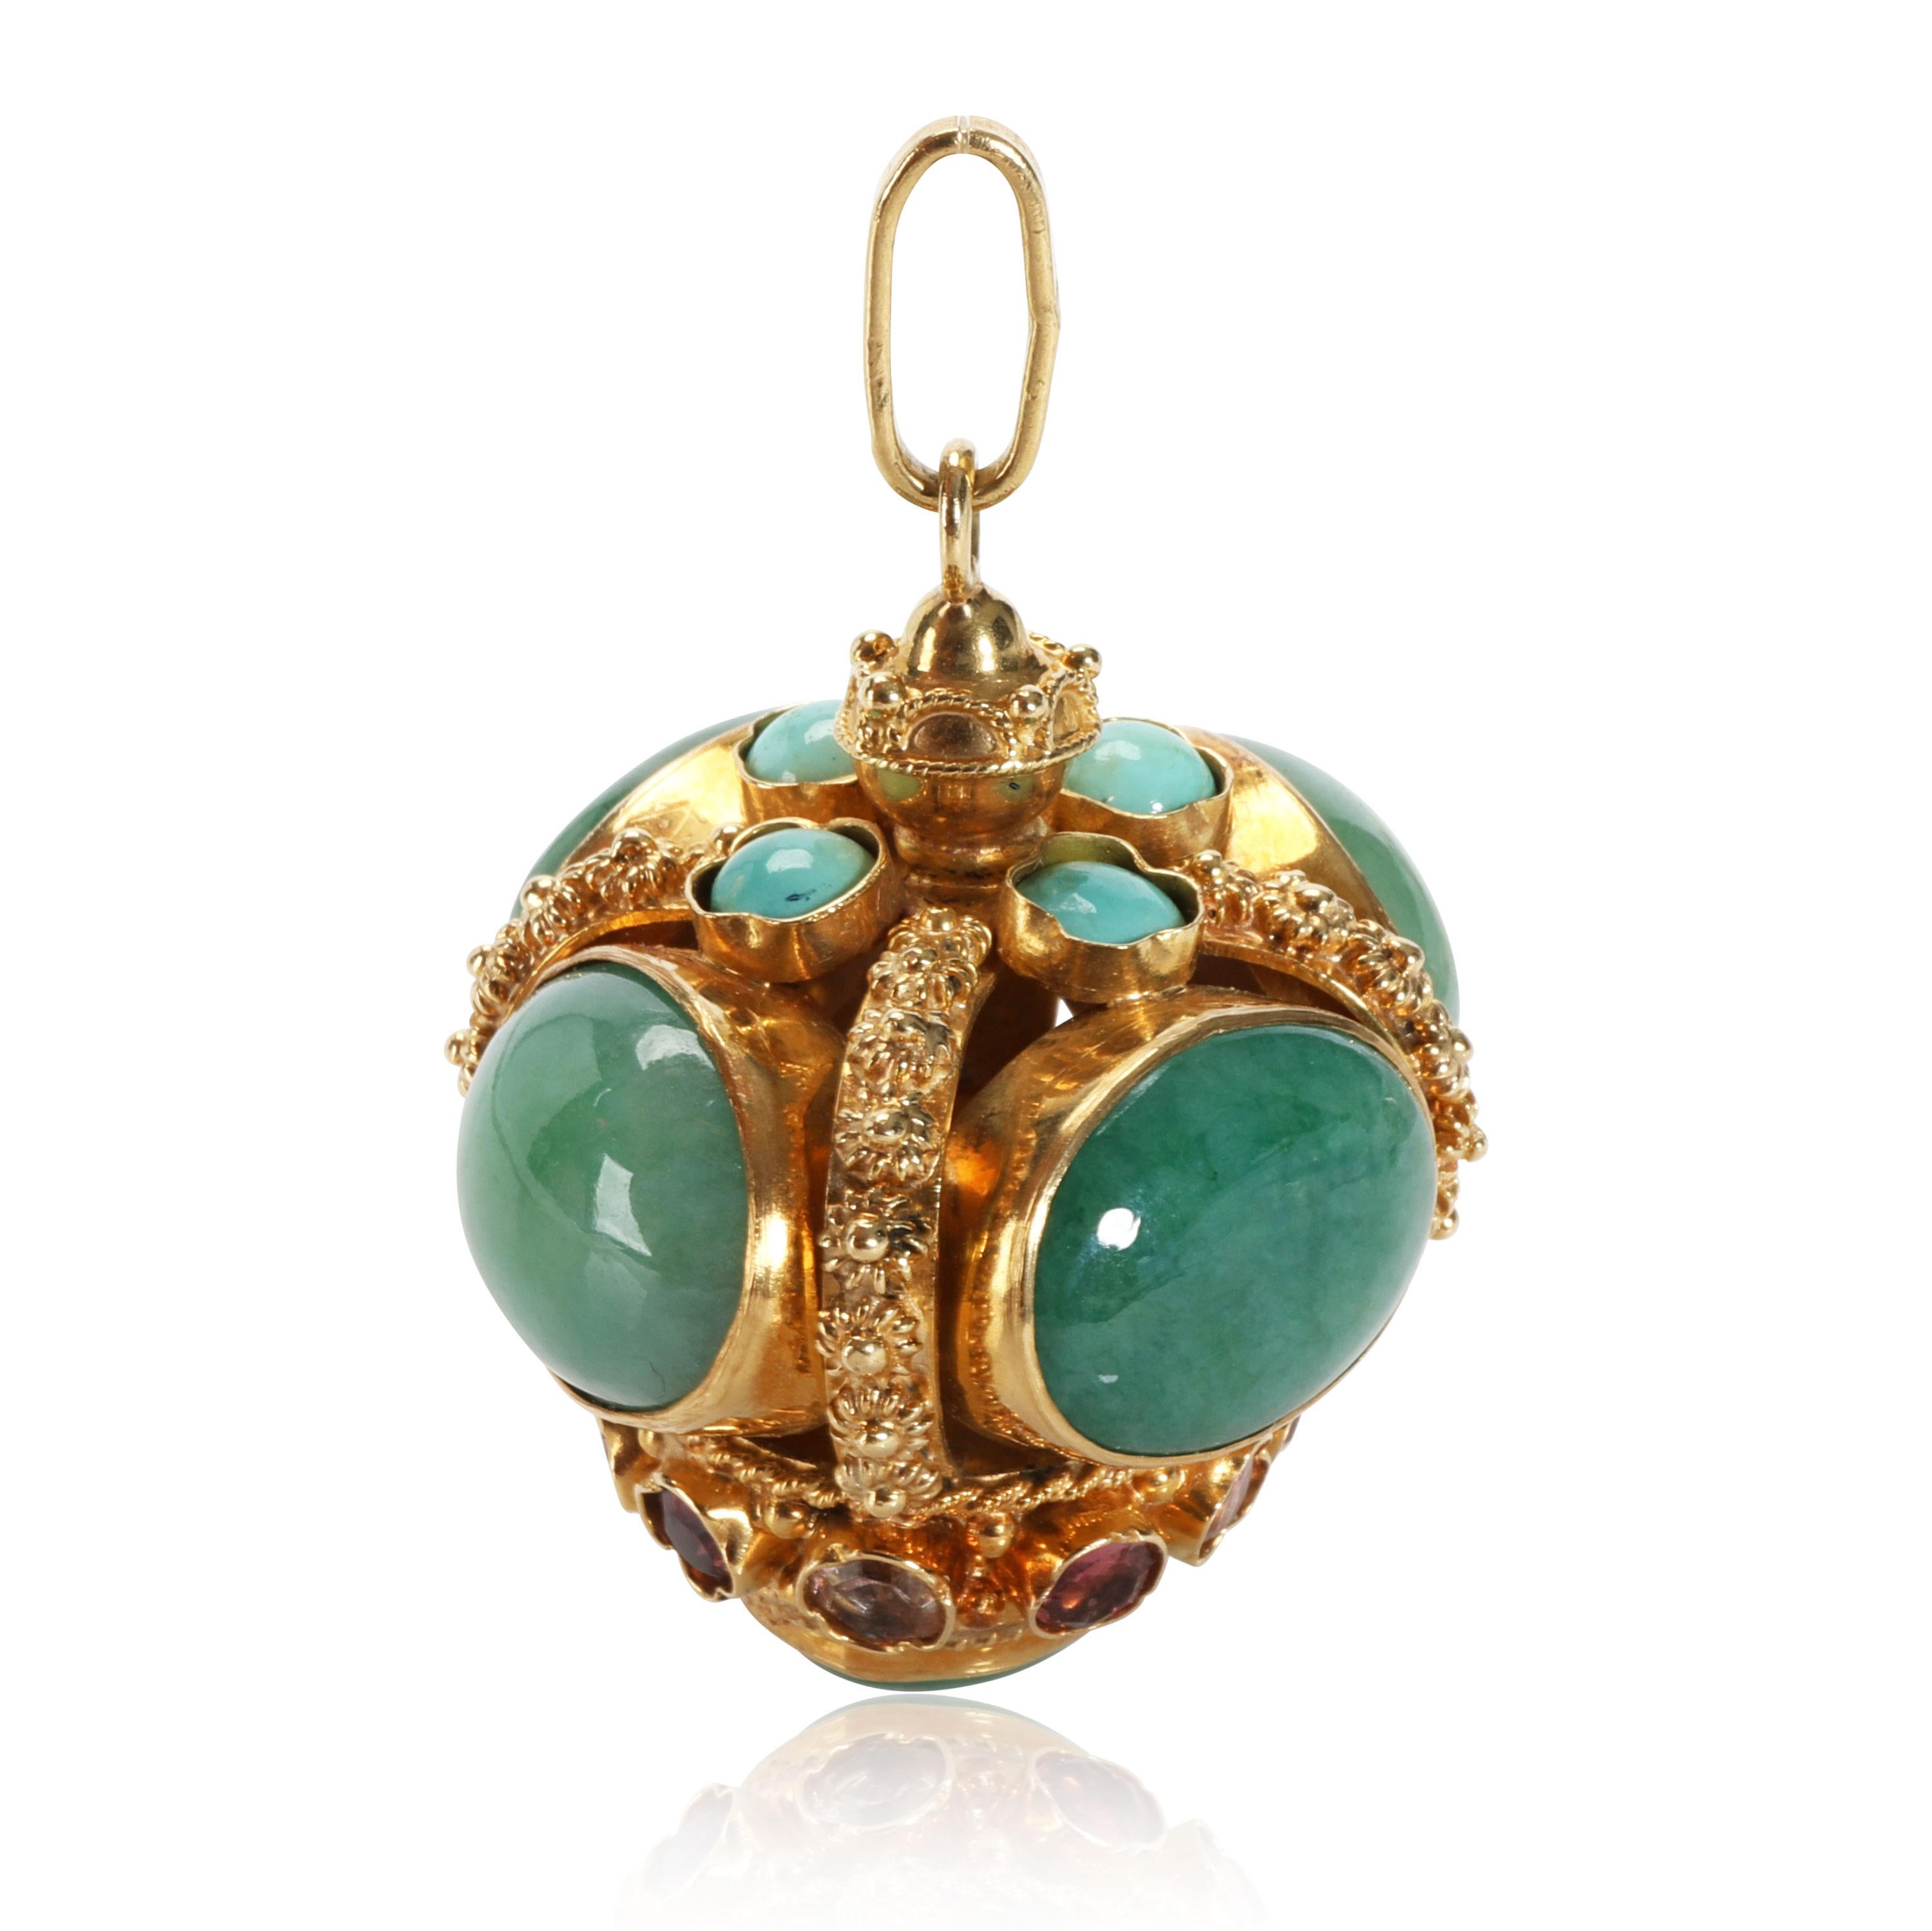 Etruscan Revival Style Charm Pendant, Jade, Turquoise & Pink Sapphires in Gold

PRIMARY DETAILS
SKU: 111406
Listing Title: Etruscan Revival Style Charm Pendant, Jade, Turquoise & Pink Sapphires in Gold
Condition Description: Retails for 4900 USD. In